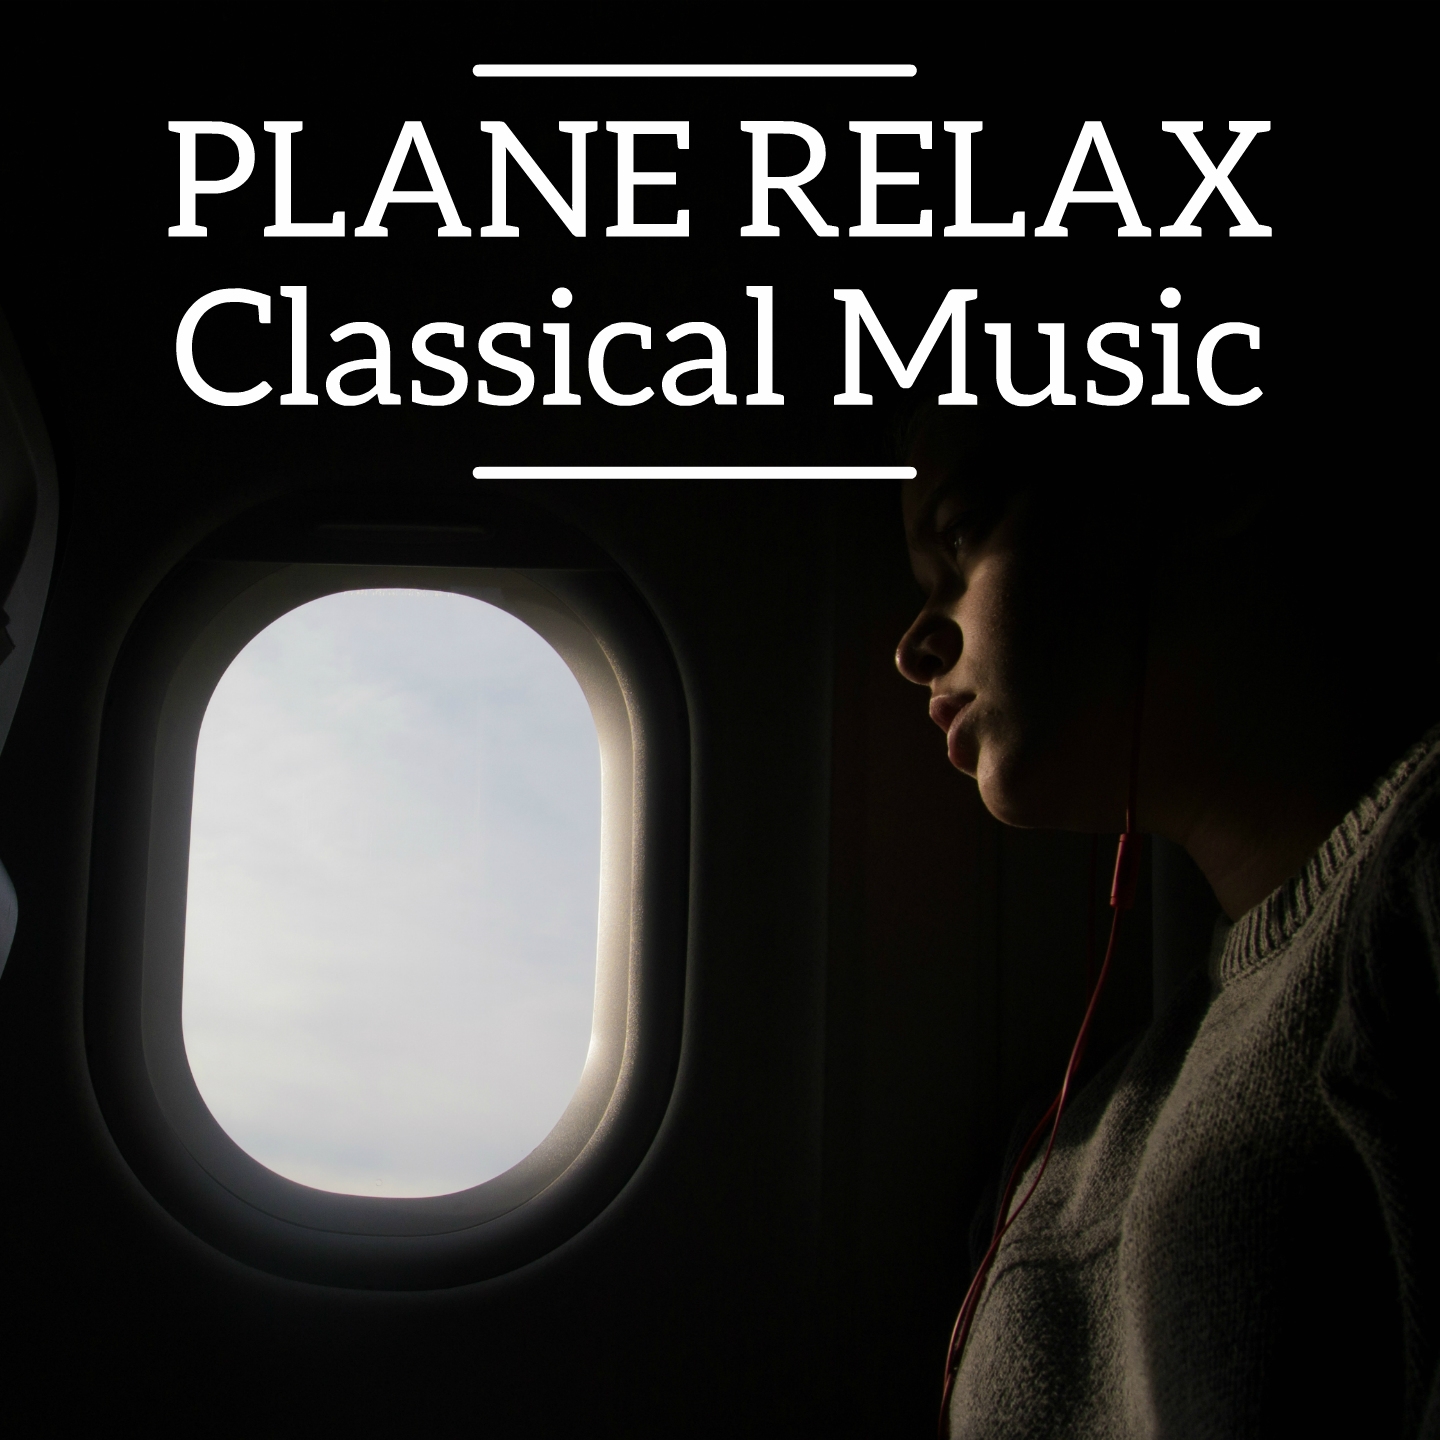 Plane Relax Classical Music